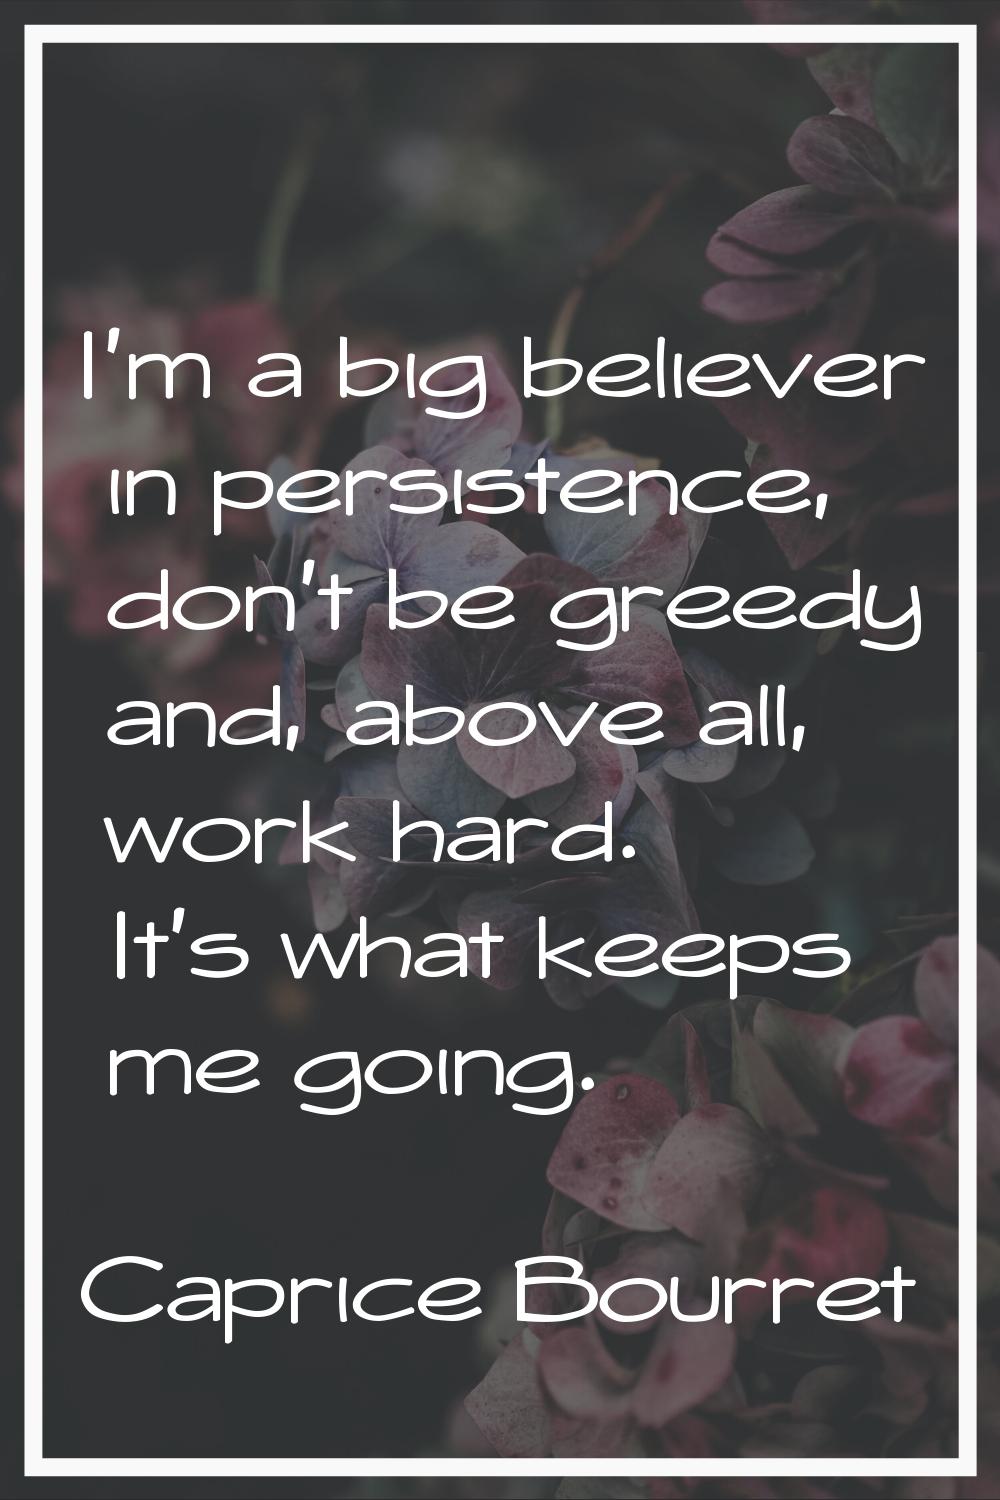 I'm a big believer in persistence, don't be greedy and, above all, work hard. It's what keeps me go